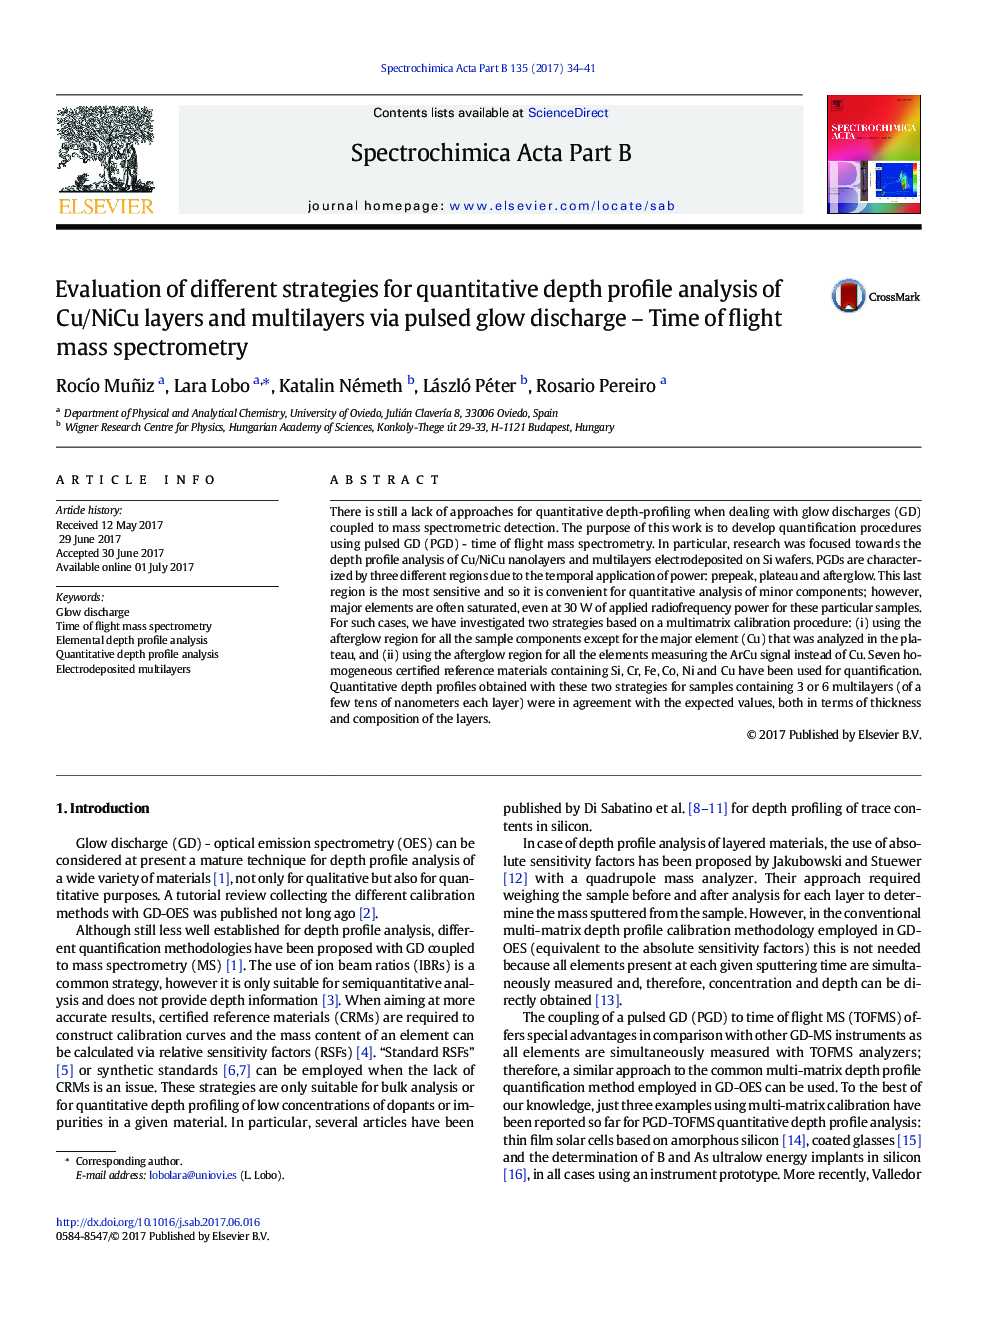 Evaluation of different strategies for quantitative depth profile analysis of Cu/NiCu layers and multilayers via pulsed glow discharge - Time of flight mass spectrometry